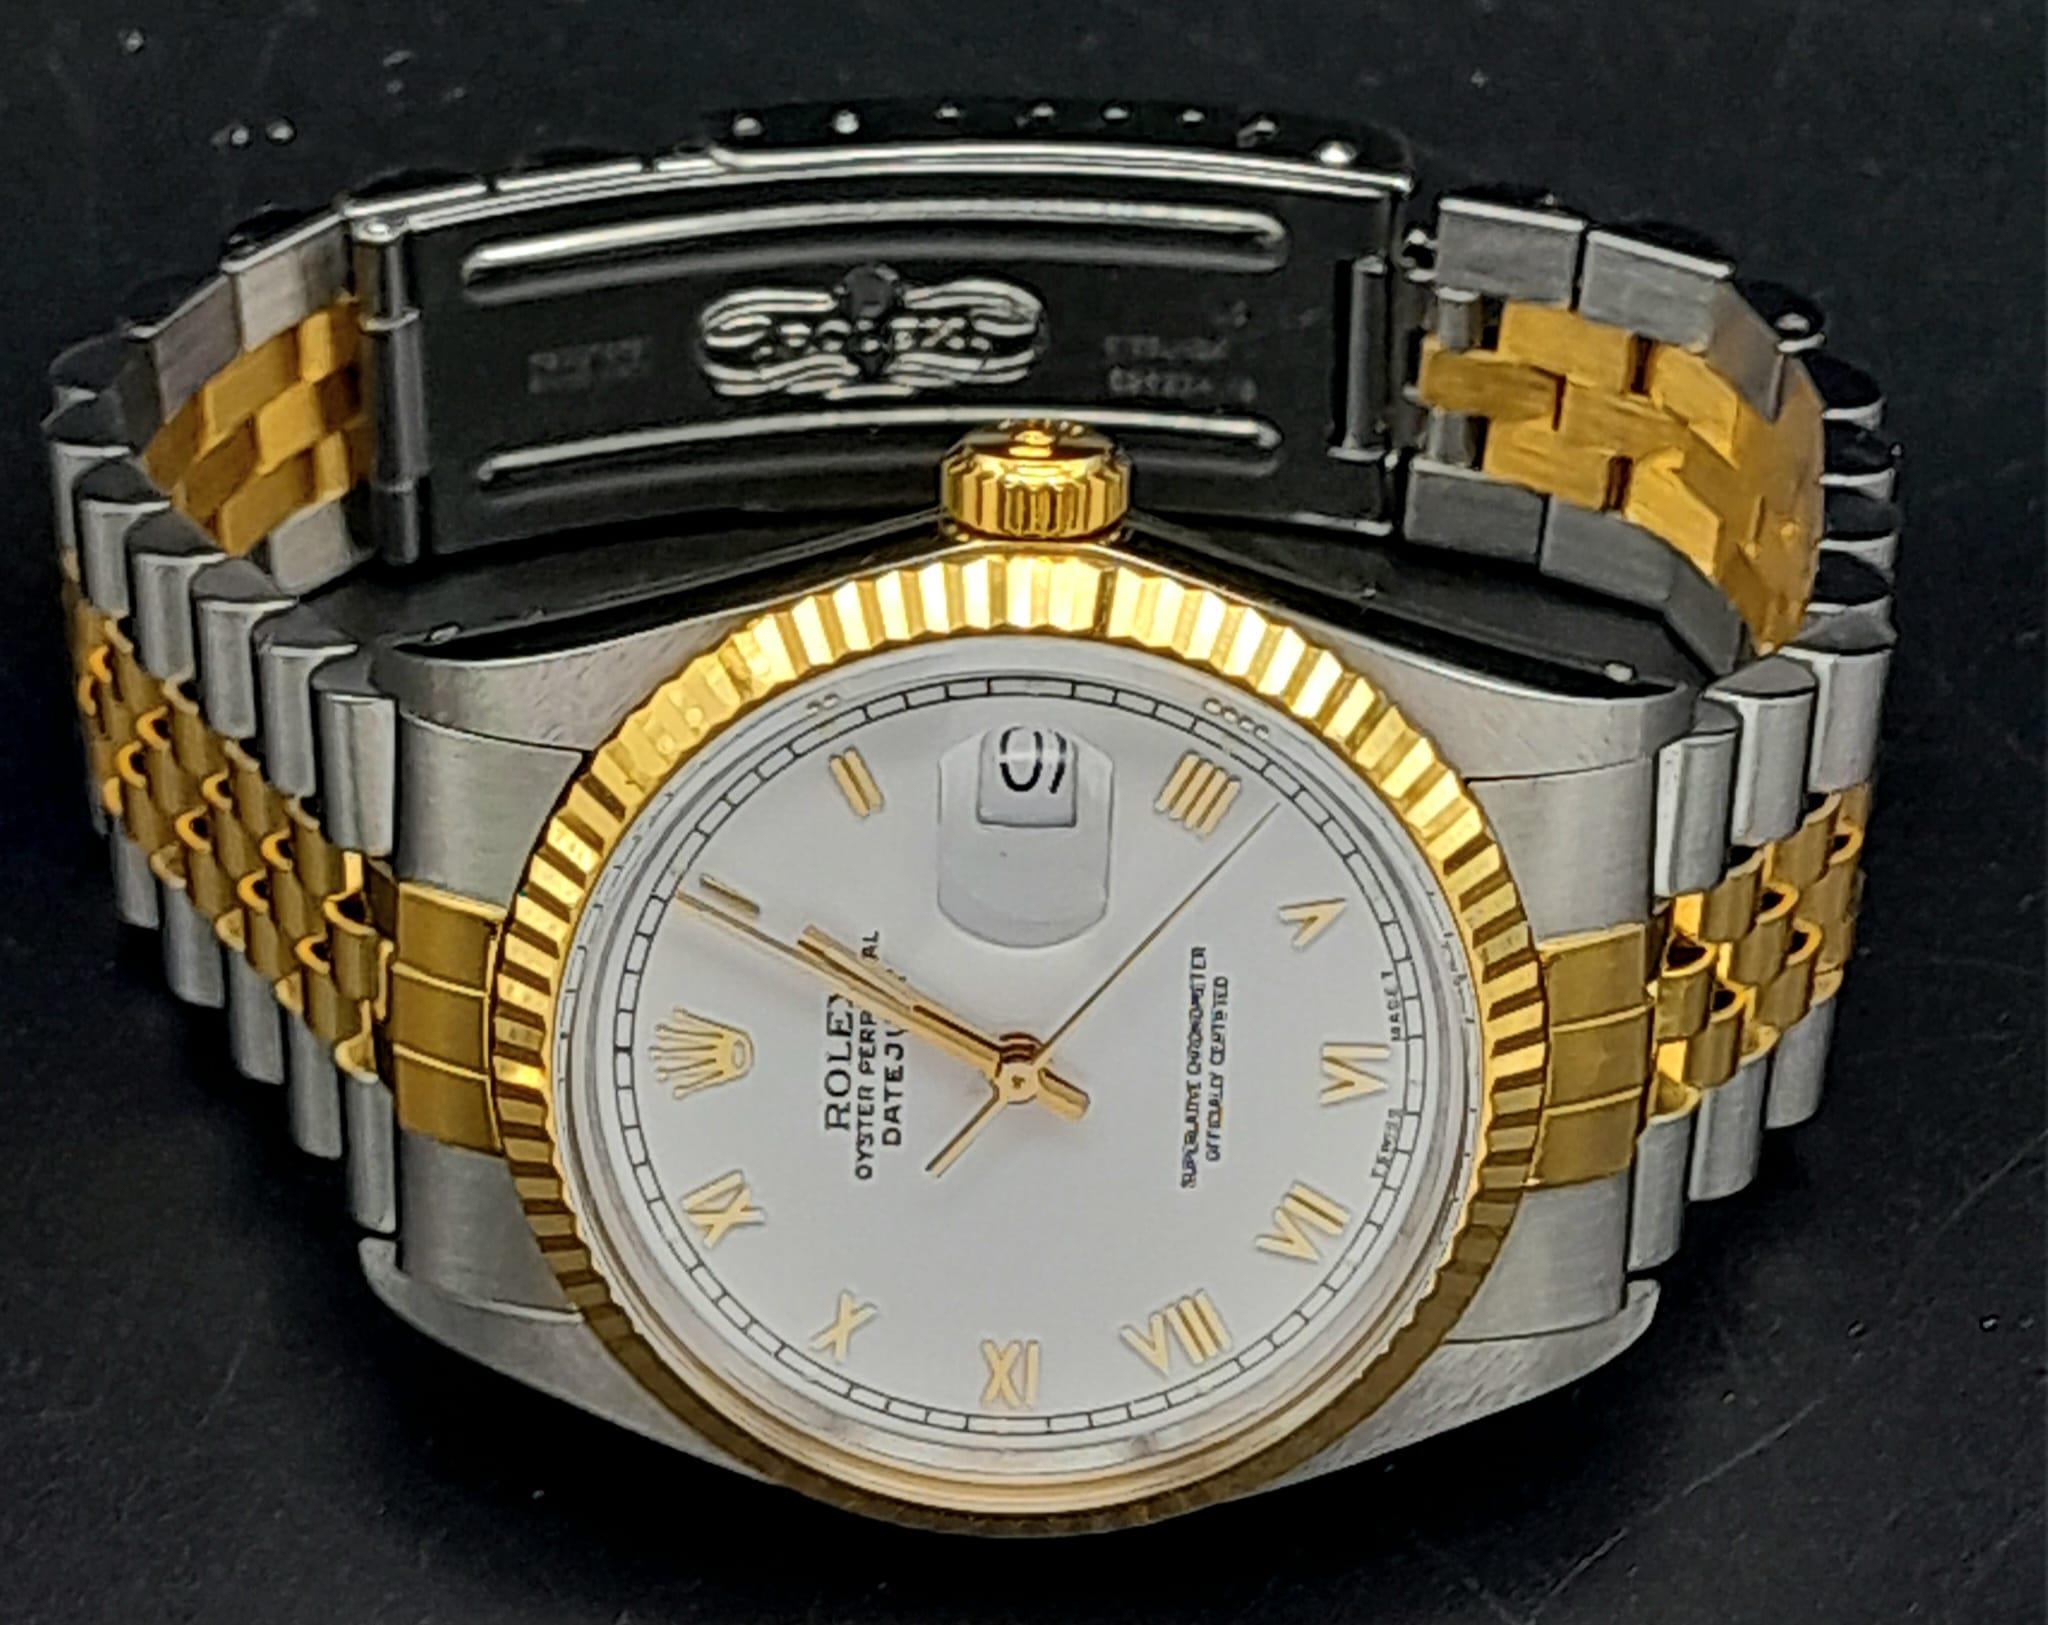 A Bi-Metal Rolex Oyster Perpetual Datejust Gents Watch. Gold and stainless steel bracelet and case - - Image 6 of 12